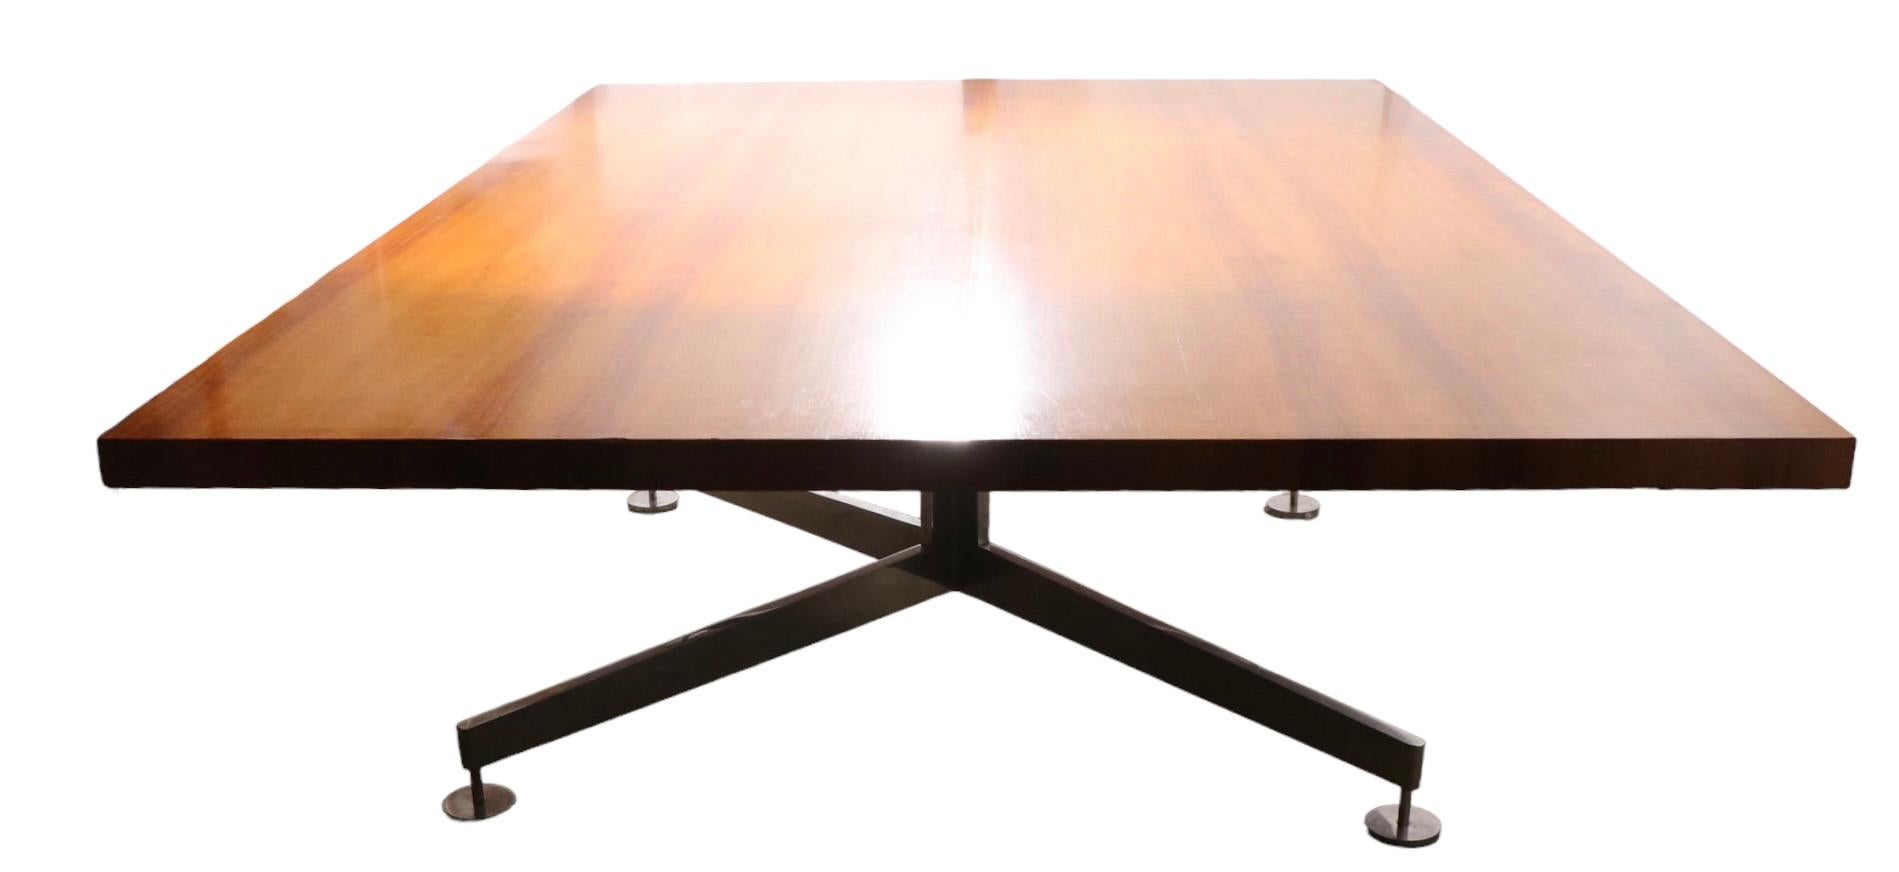 20th Century   Conference Dining Work Table Designed by Wormley for Dunbar 2 available  For Sale